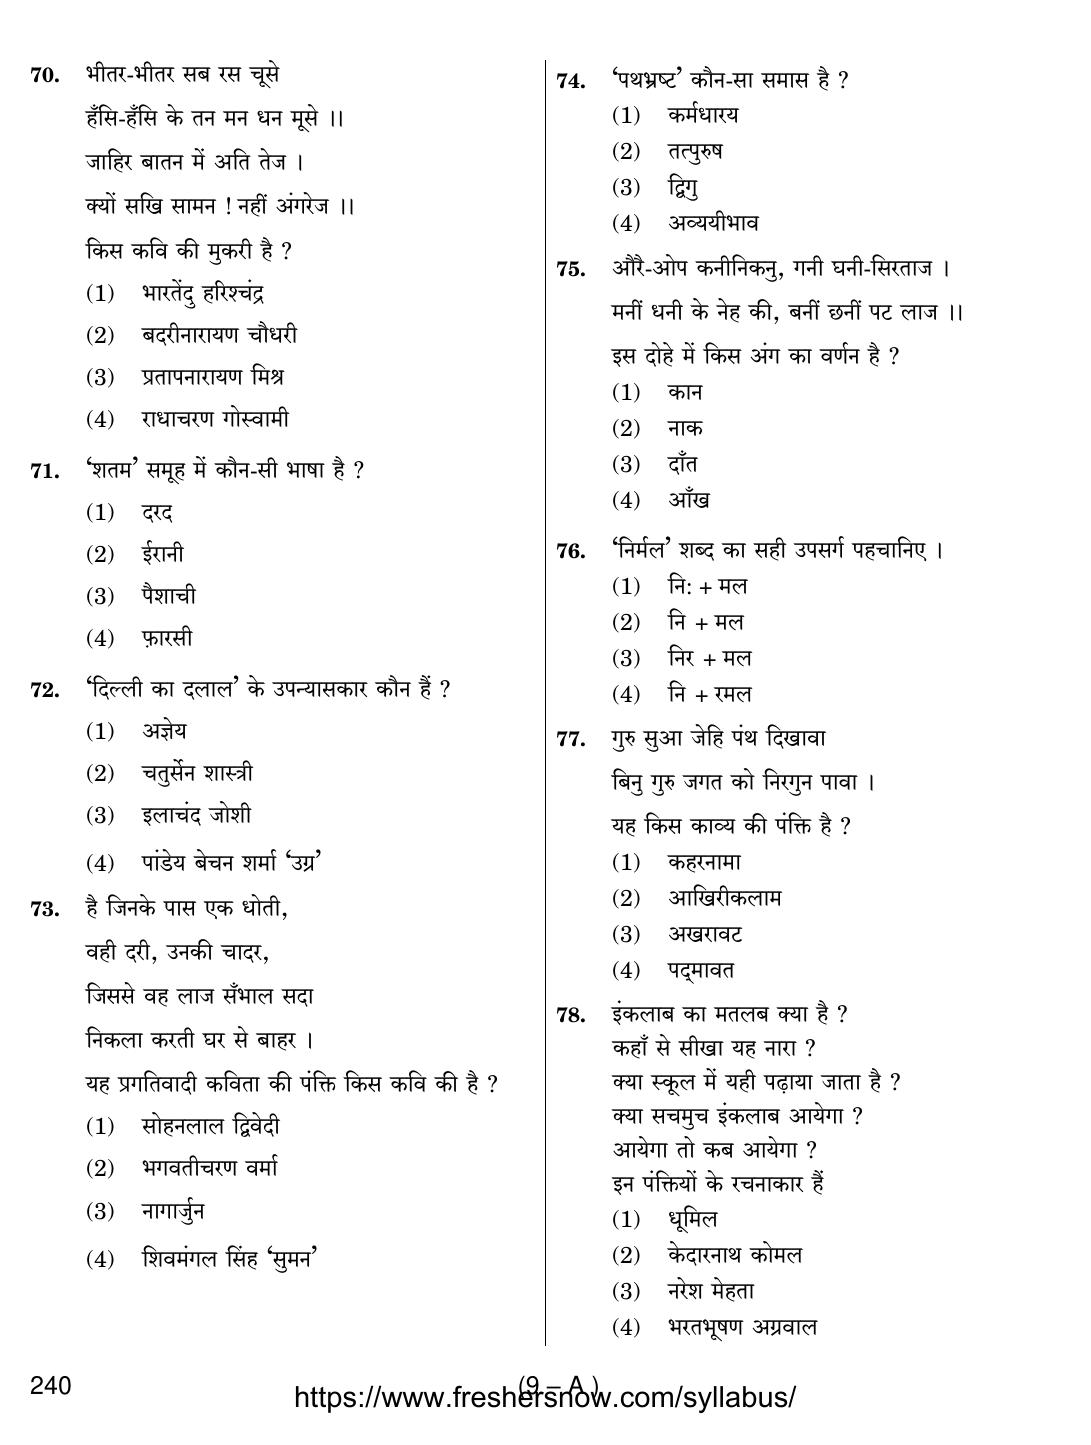 Punjab B.Ed Question Papers for Hindi Language - Page 9